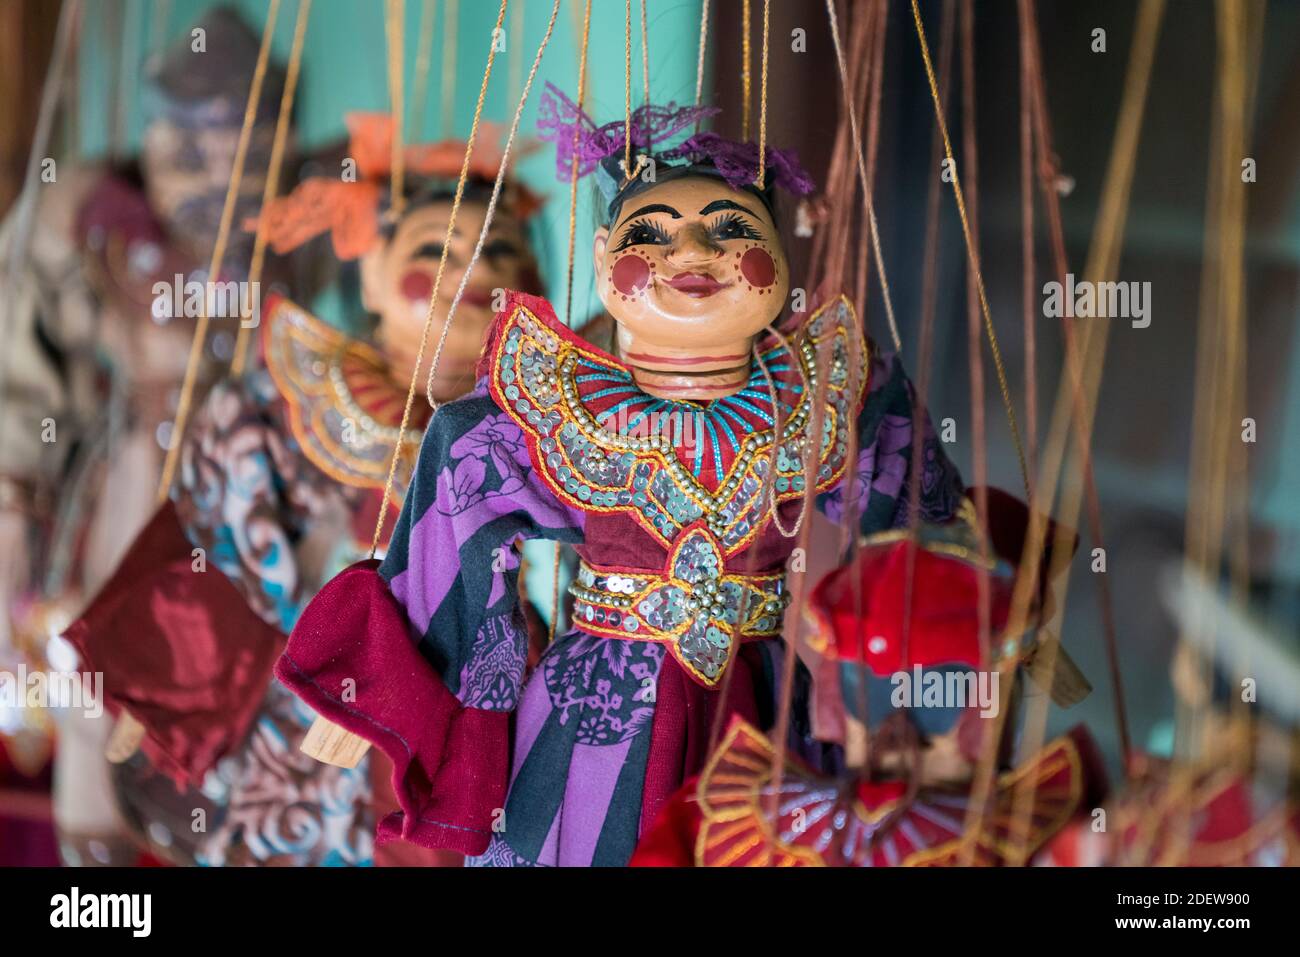 Traditional Puppet Show - Myanmar by Jlr